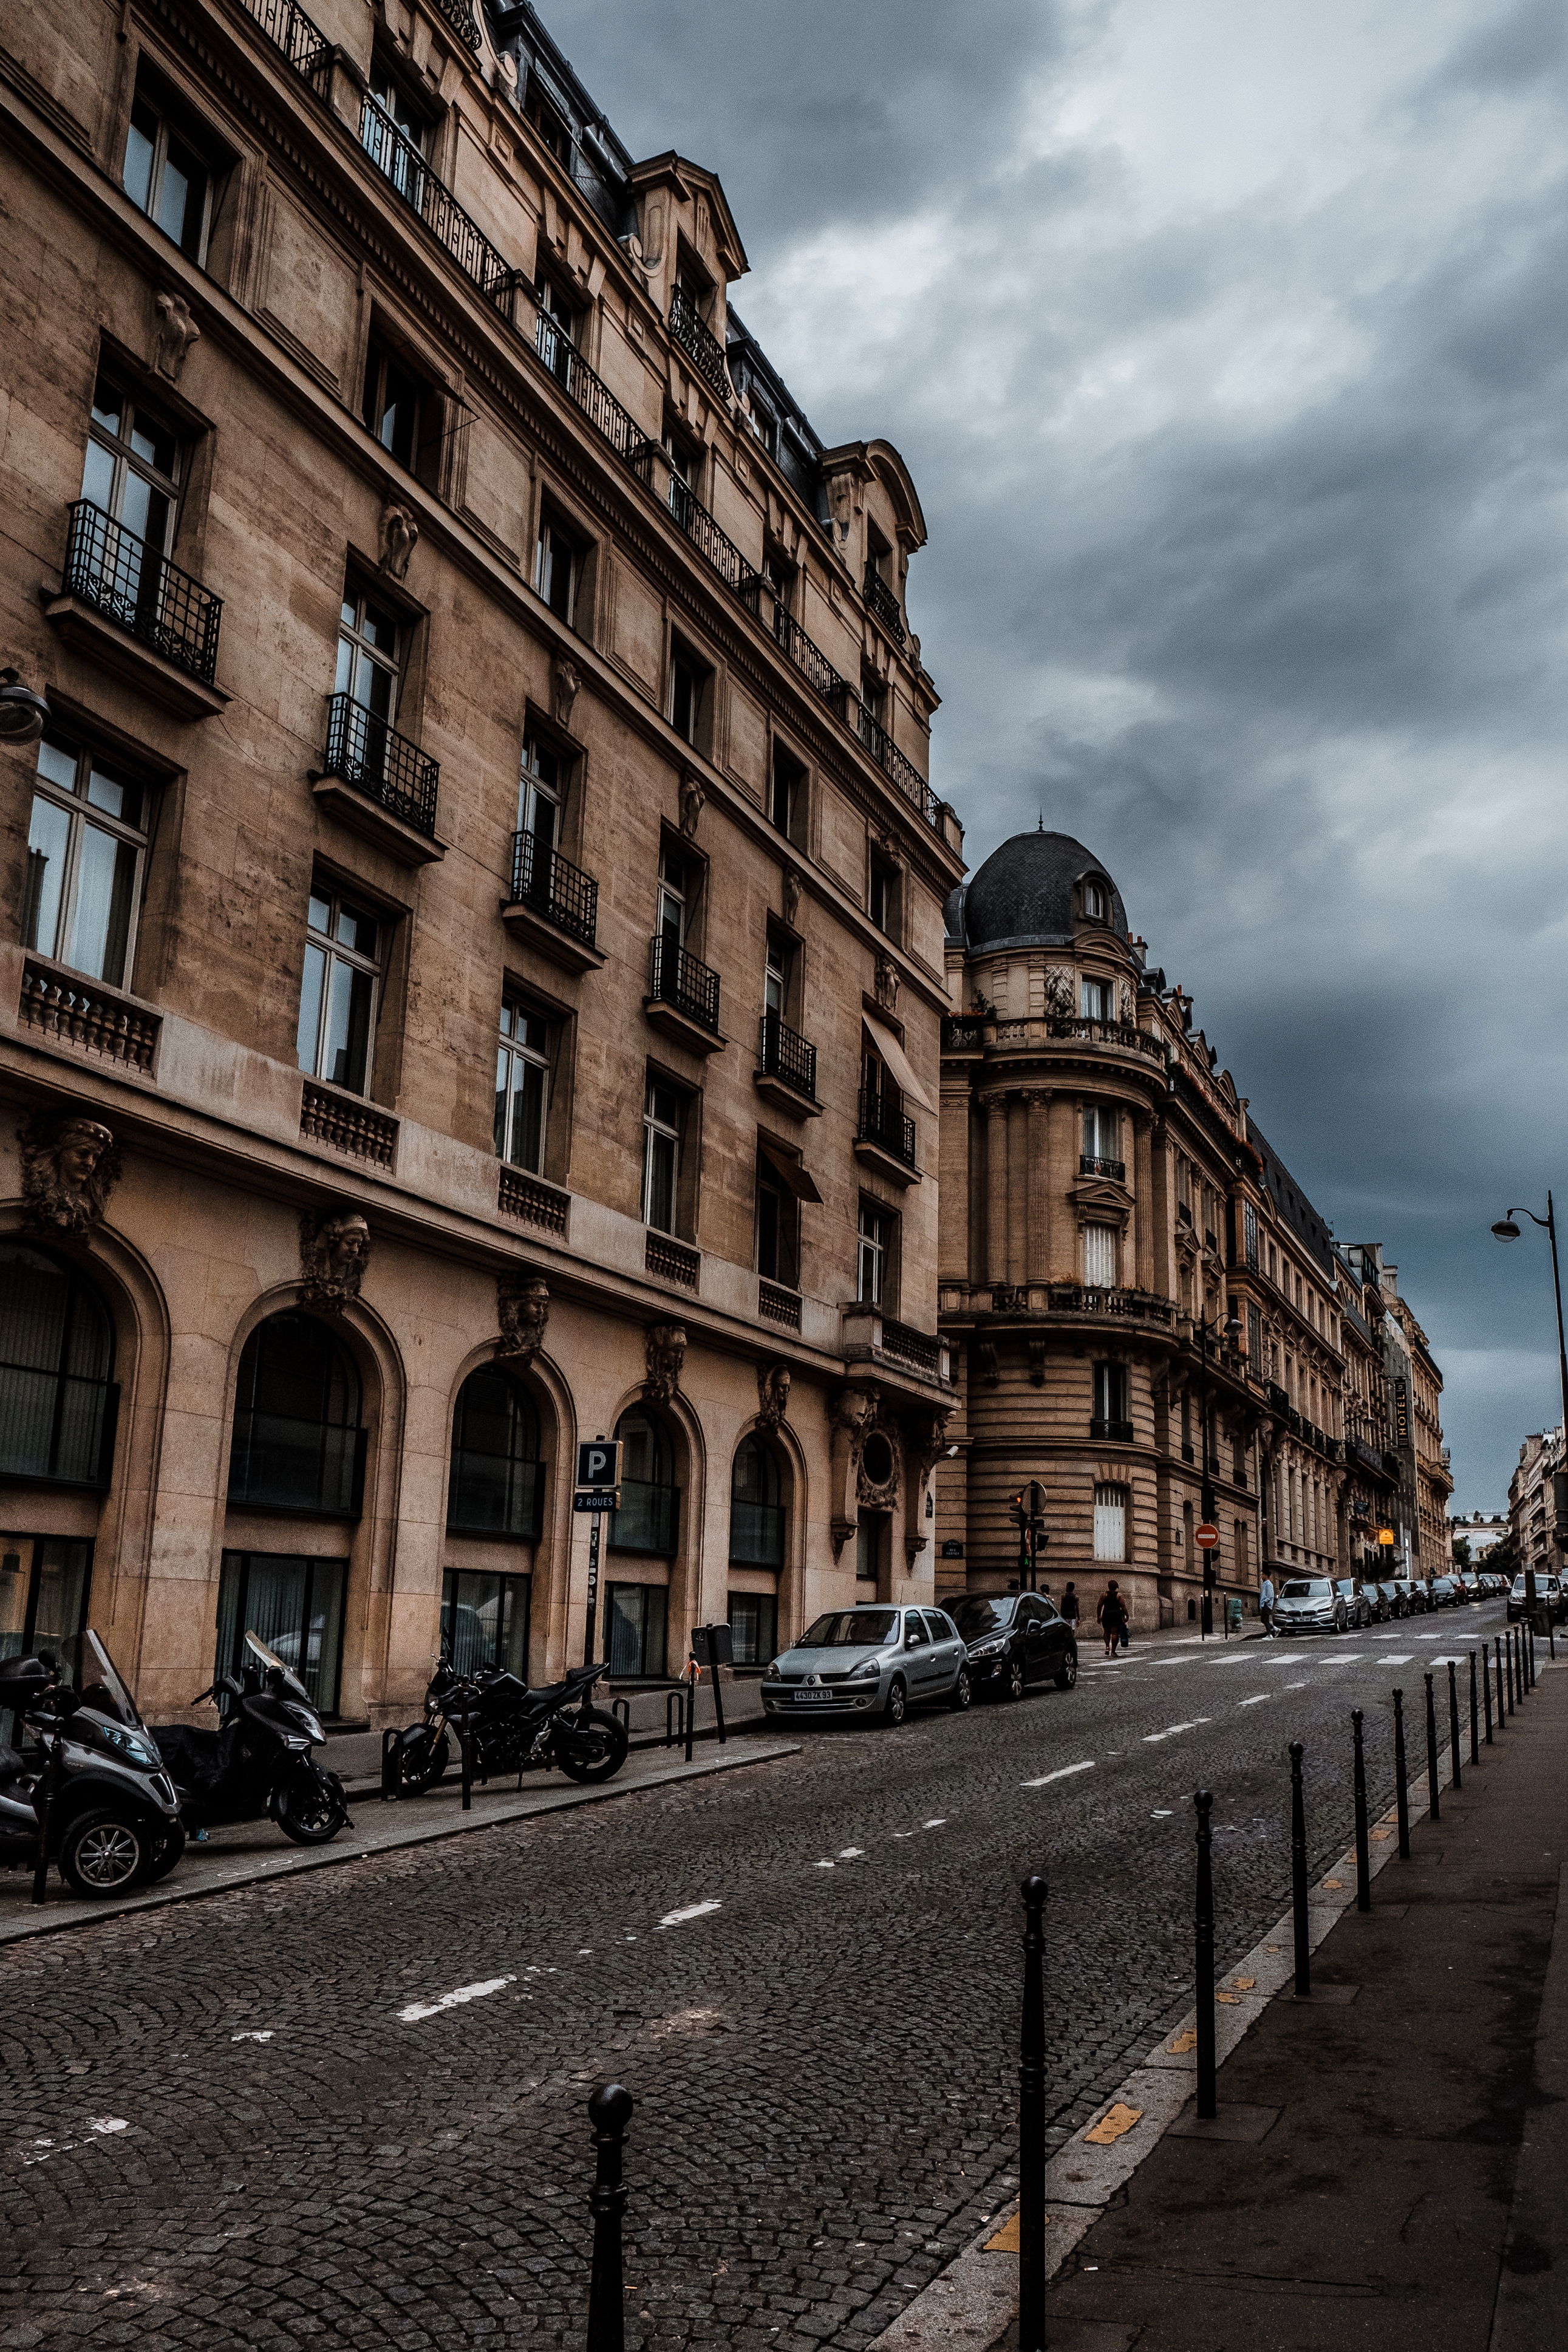 paris, cities, architecture, motorcycles, cars, city, building, france, street